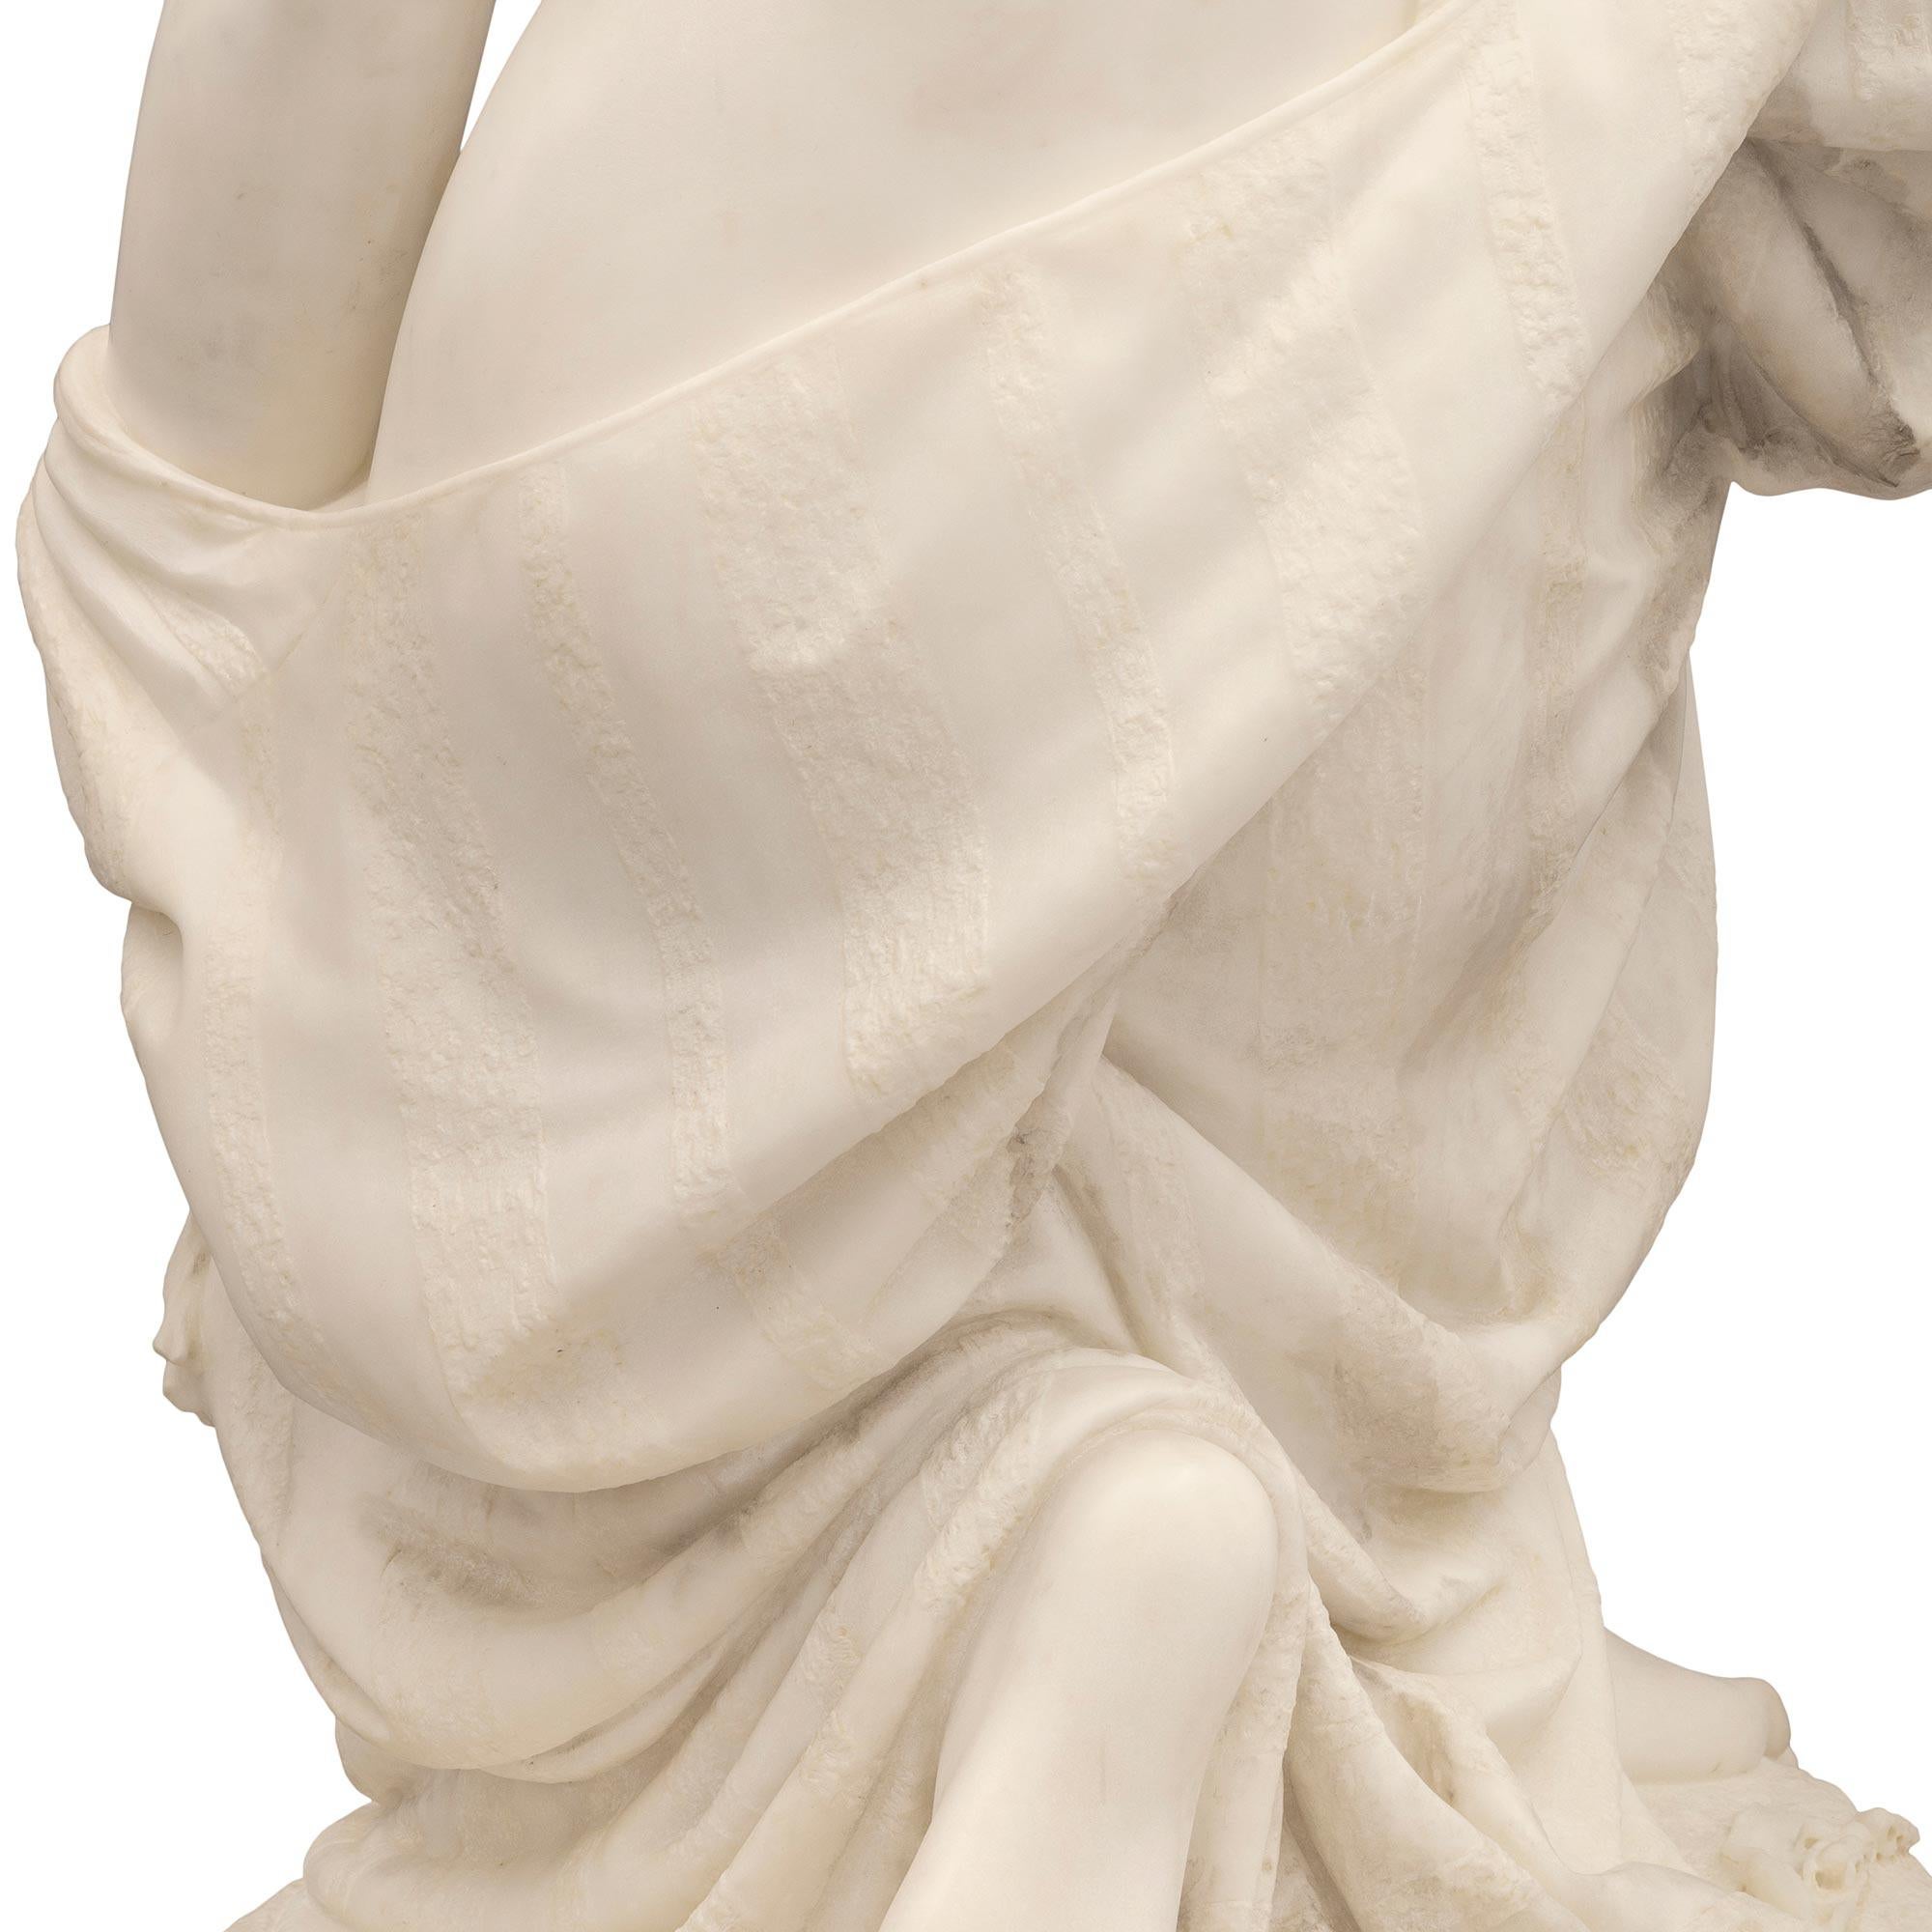 Italian Turn of the Century Marble Statue Signed Prof. R. Romanelli 1909 For Sale 3